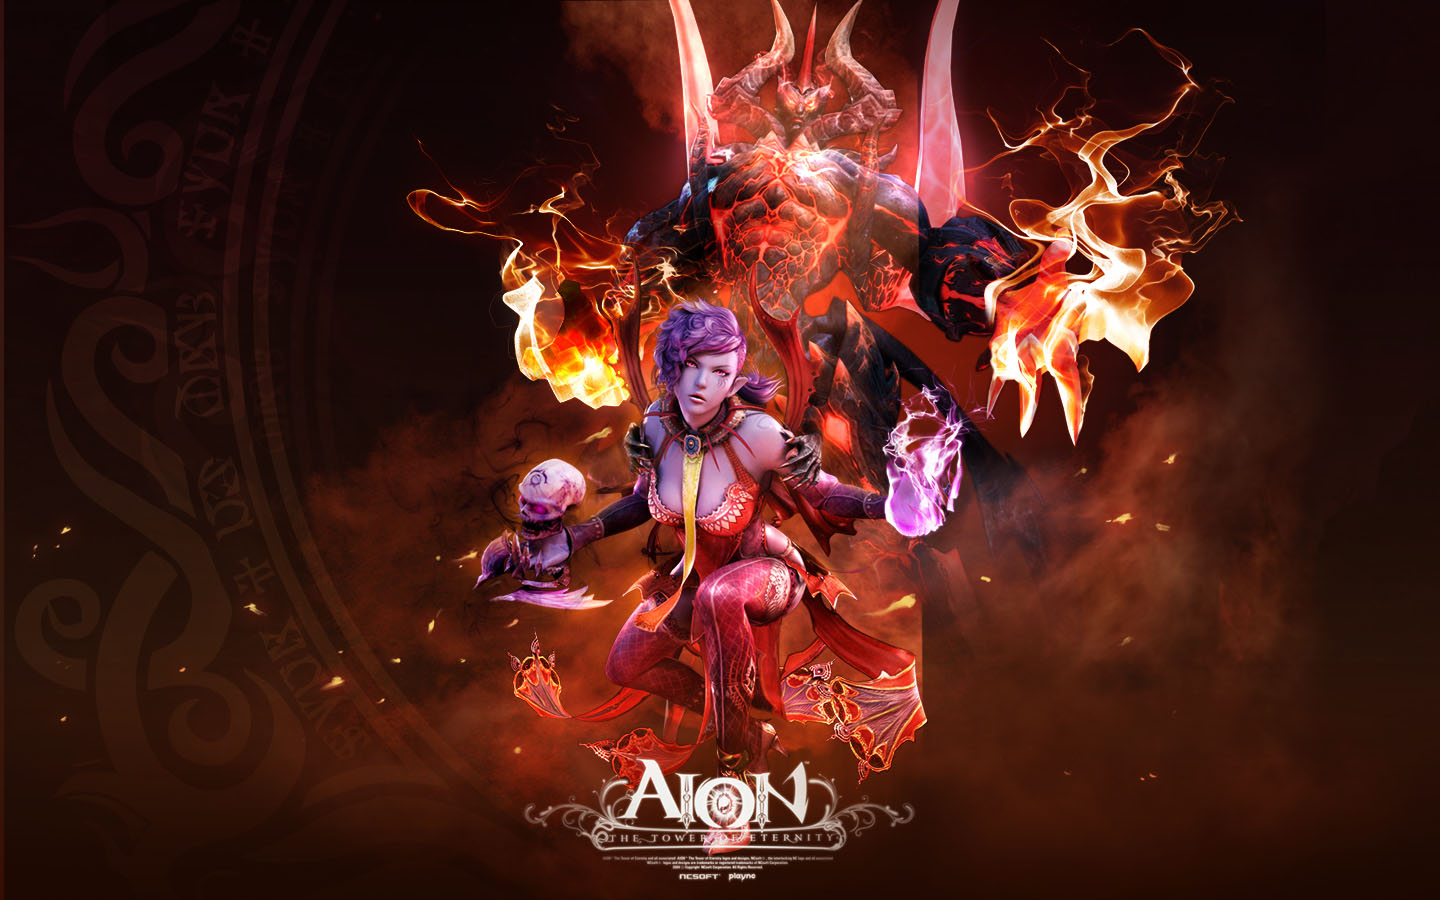 3d game fantasy character aion by jungwon park